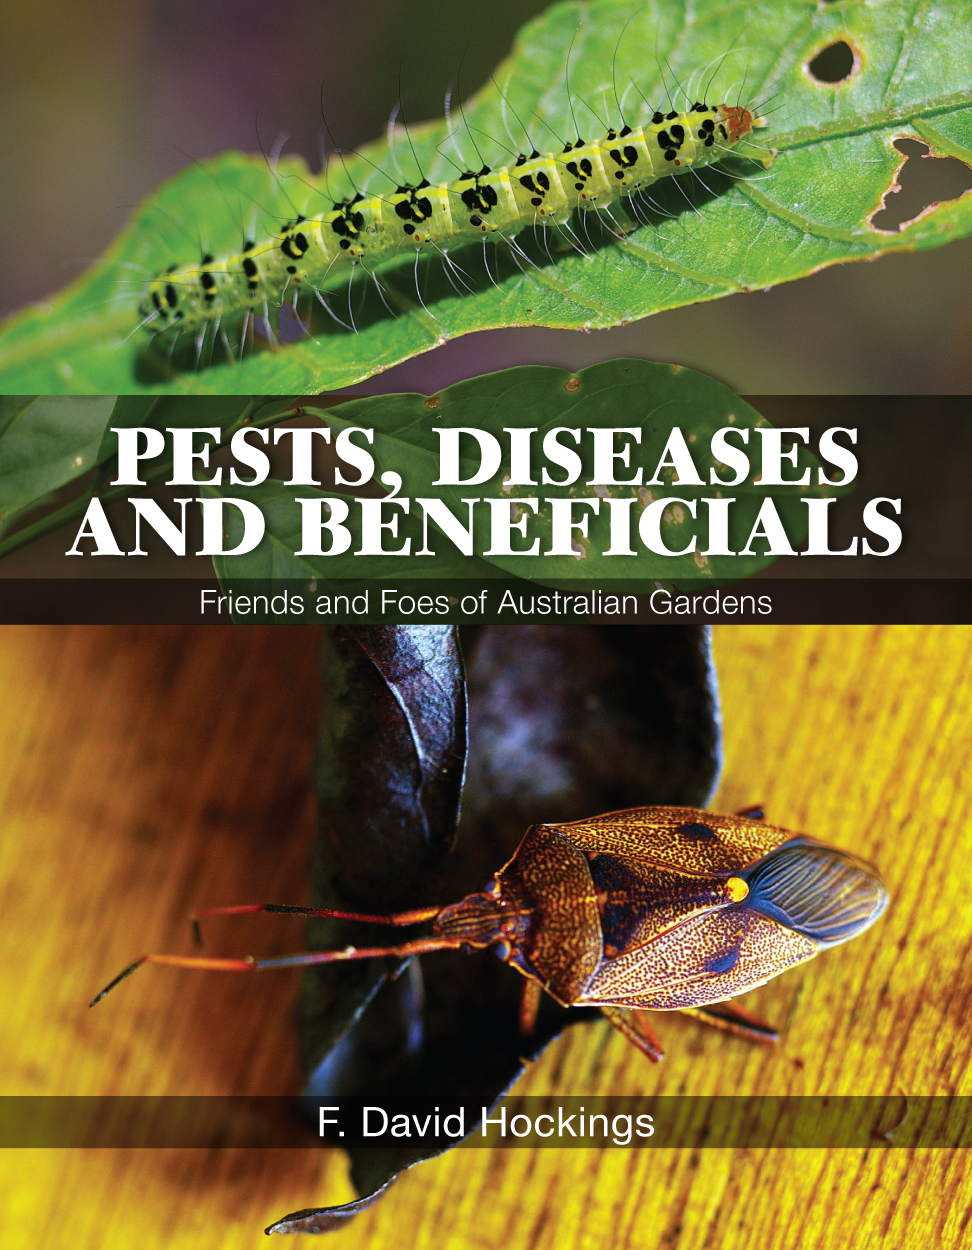 The cover image featuring two photographs, the top photgraph of a green caterpillar on a green leaf, the bottom photograph of a brown bettle on a yell